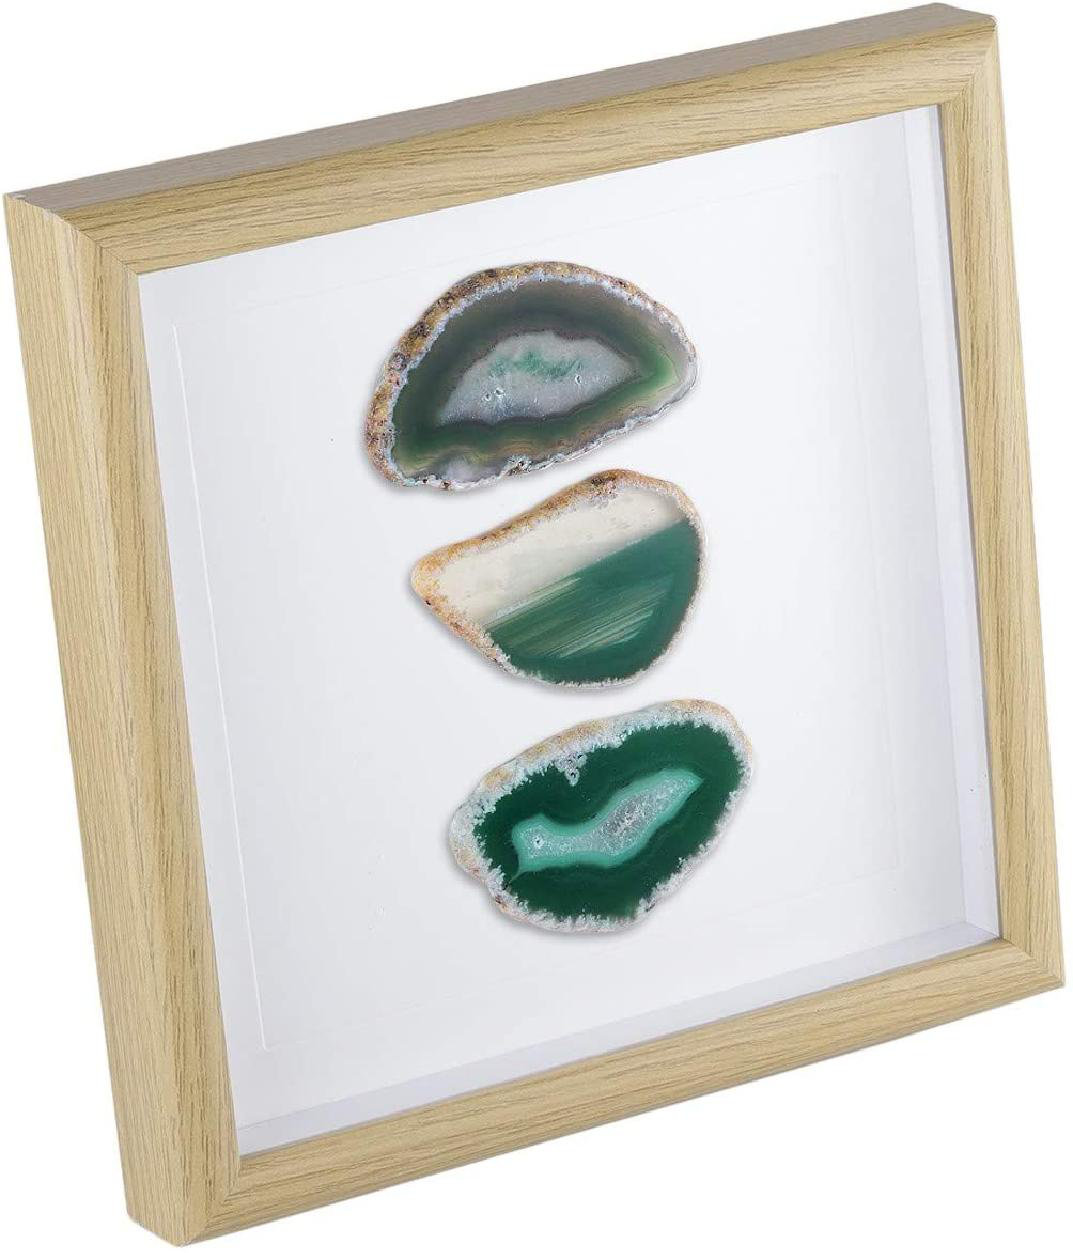 Home Office Room Decorations Handcrafted Sliced Agate Framed Wall Decor Black 